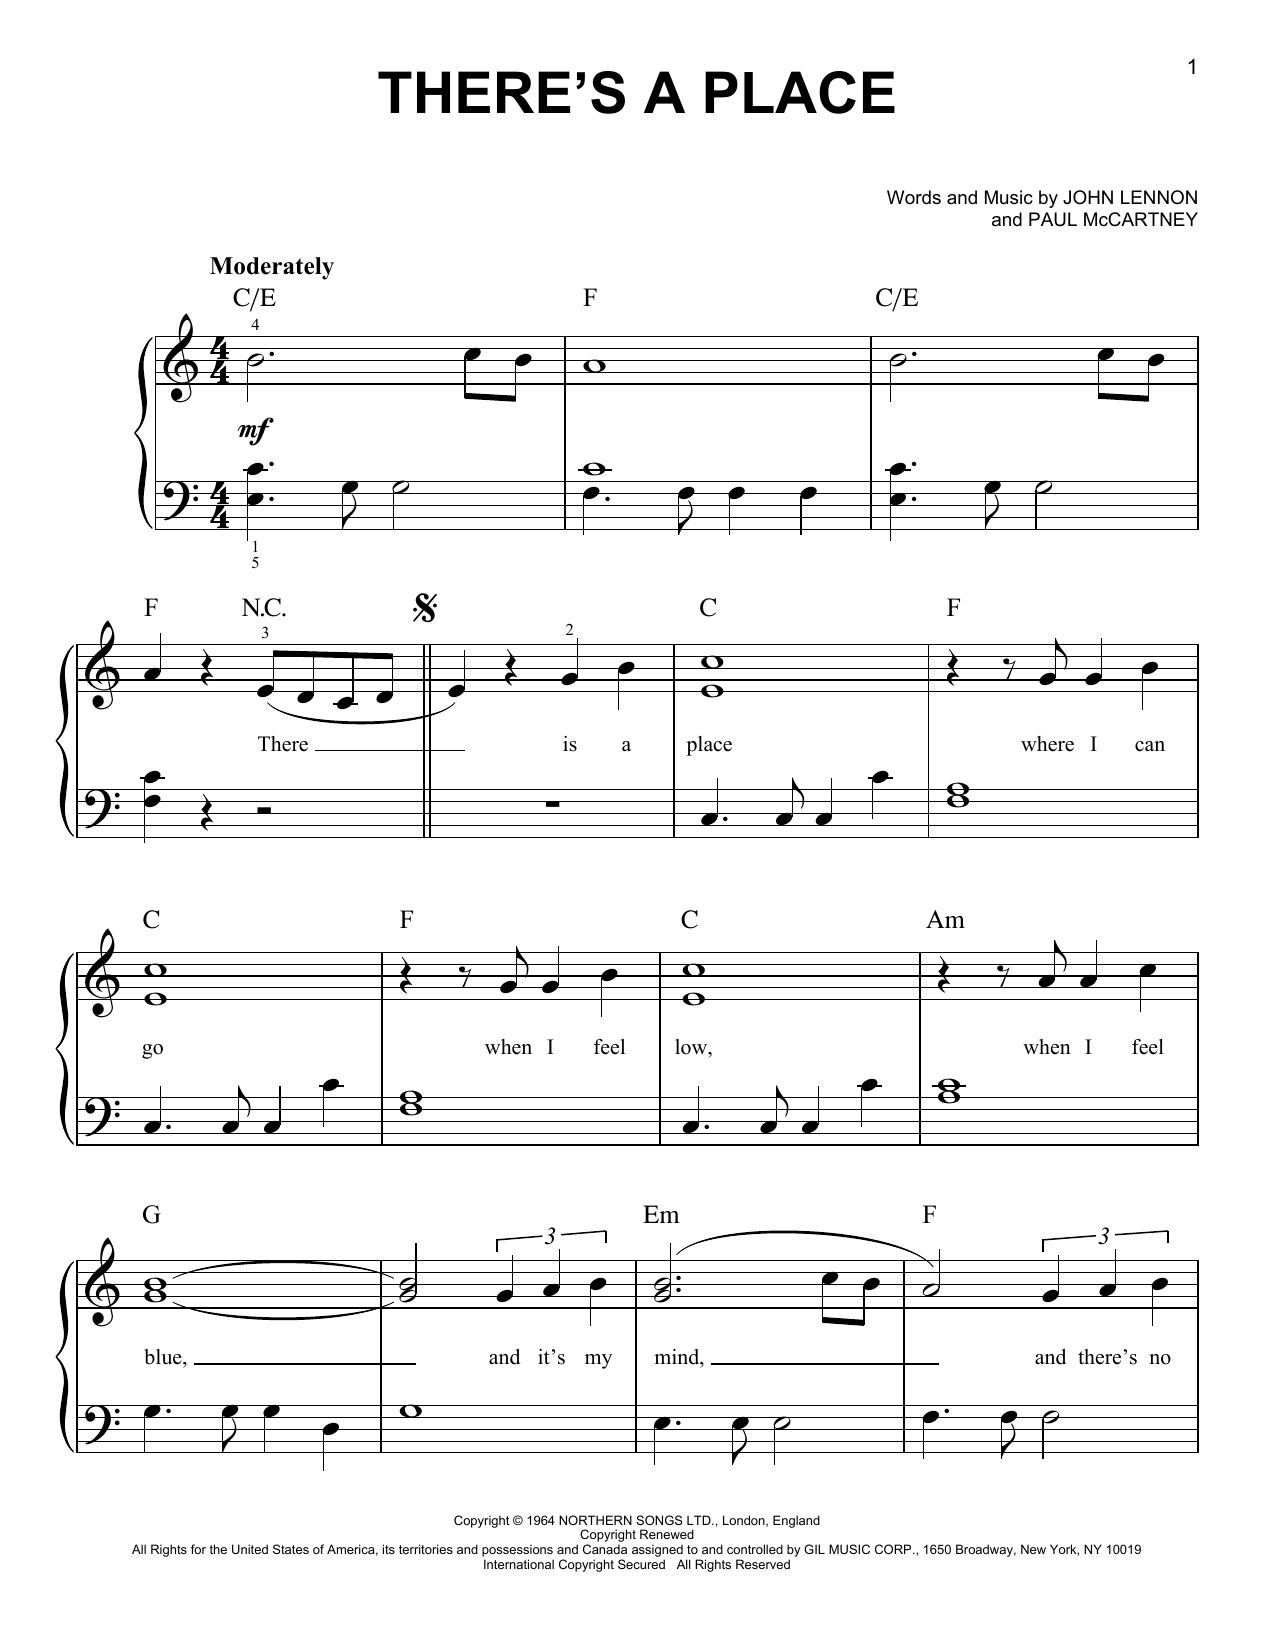 Download The Beatles There's A Place Sheet Music